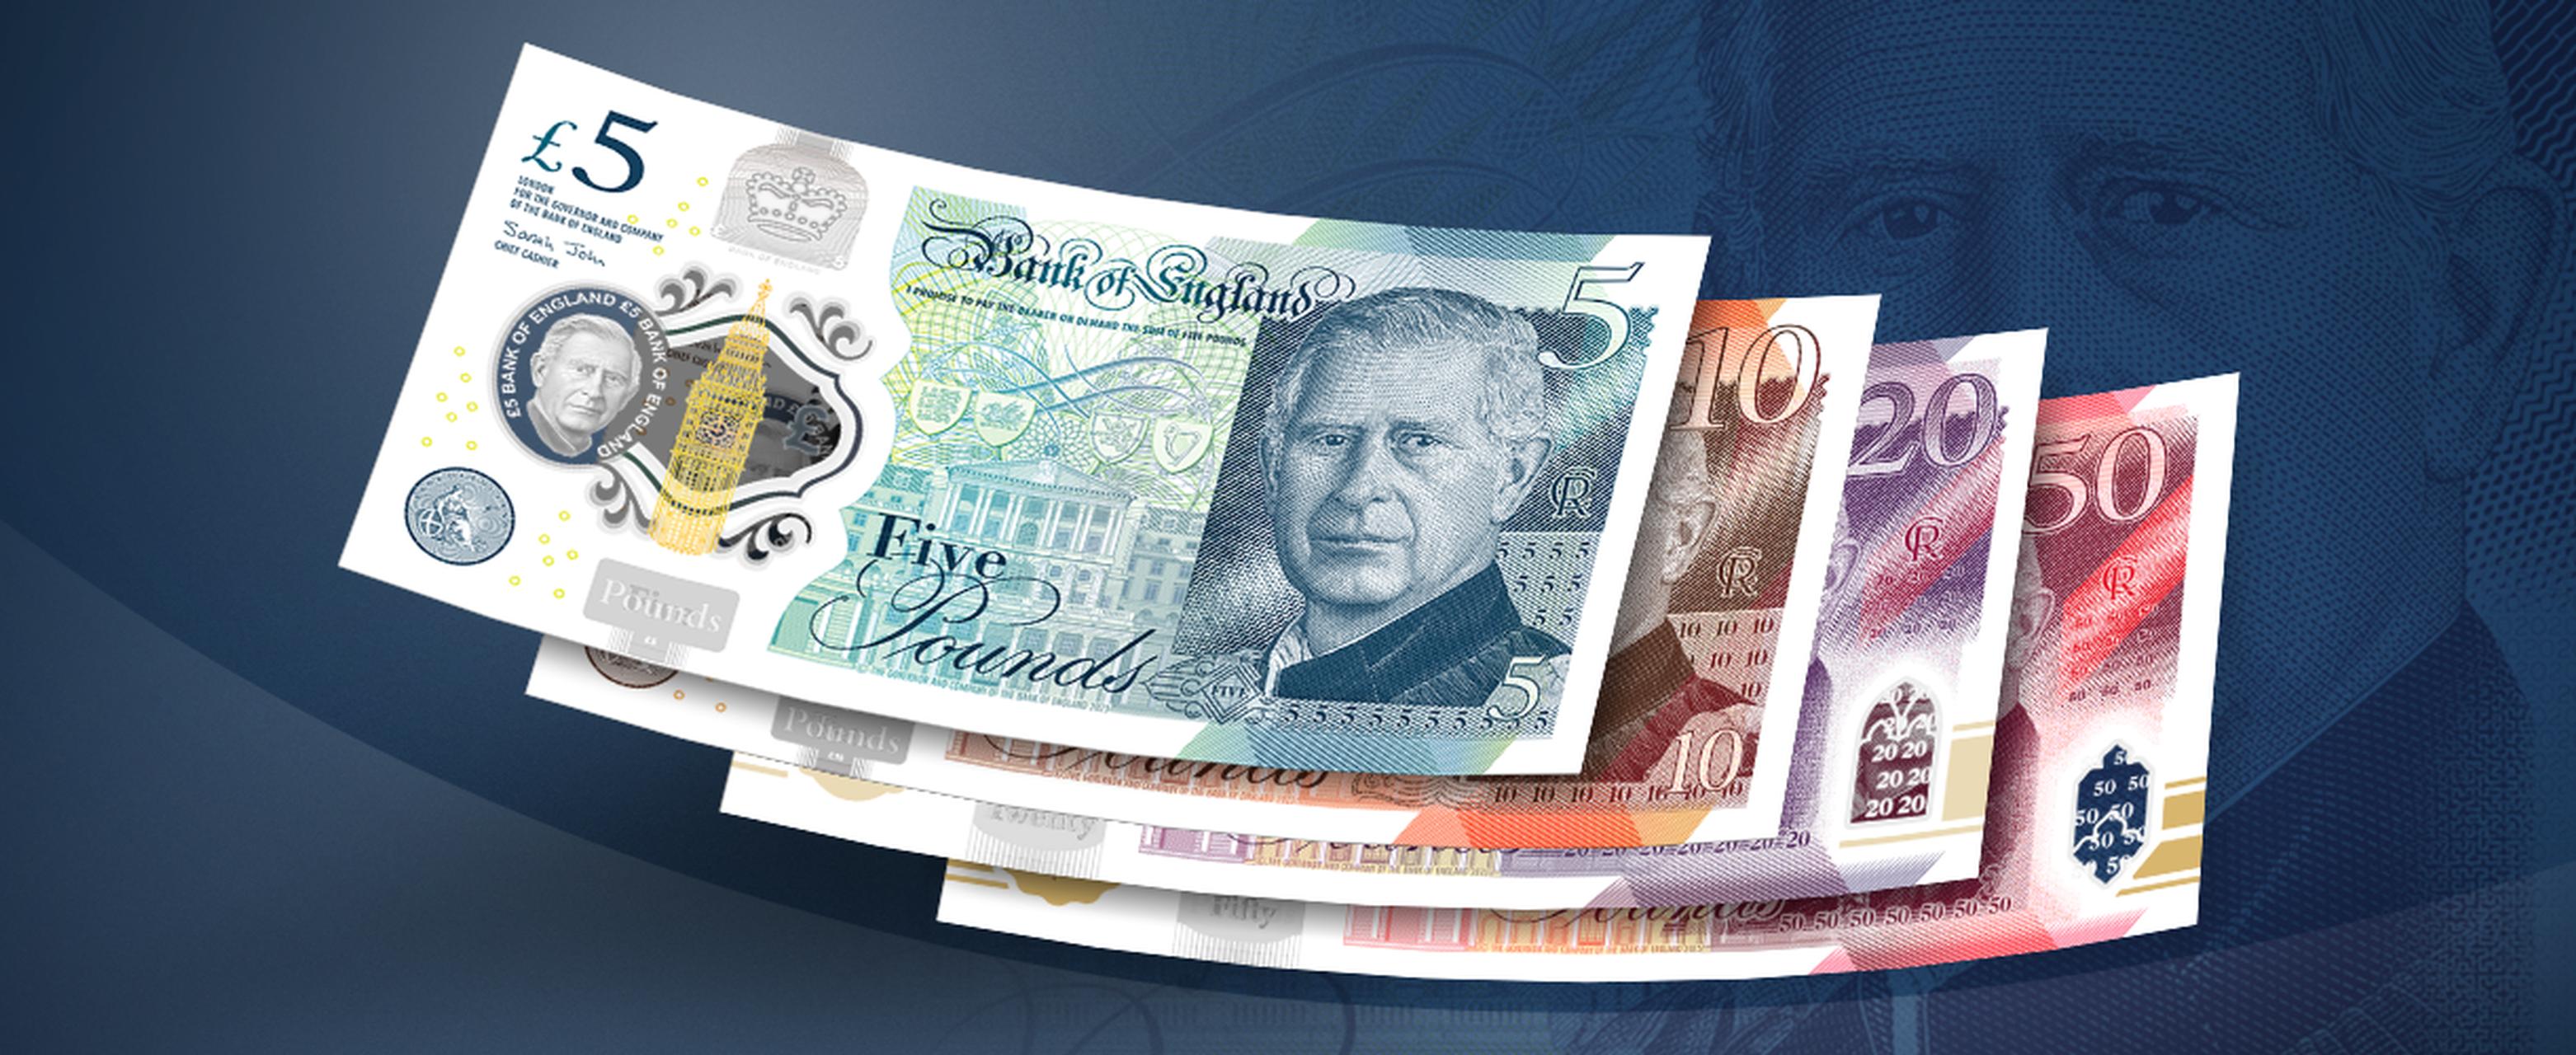 King Charles III banknotes in circulation from June